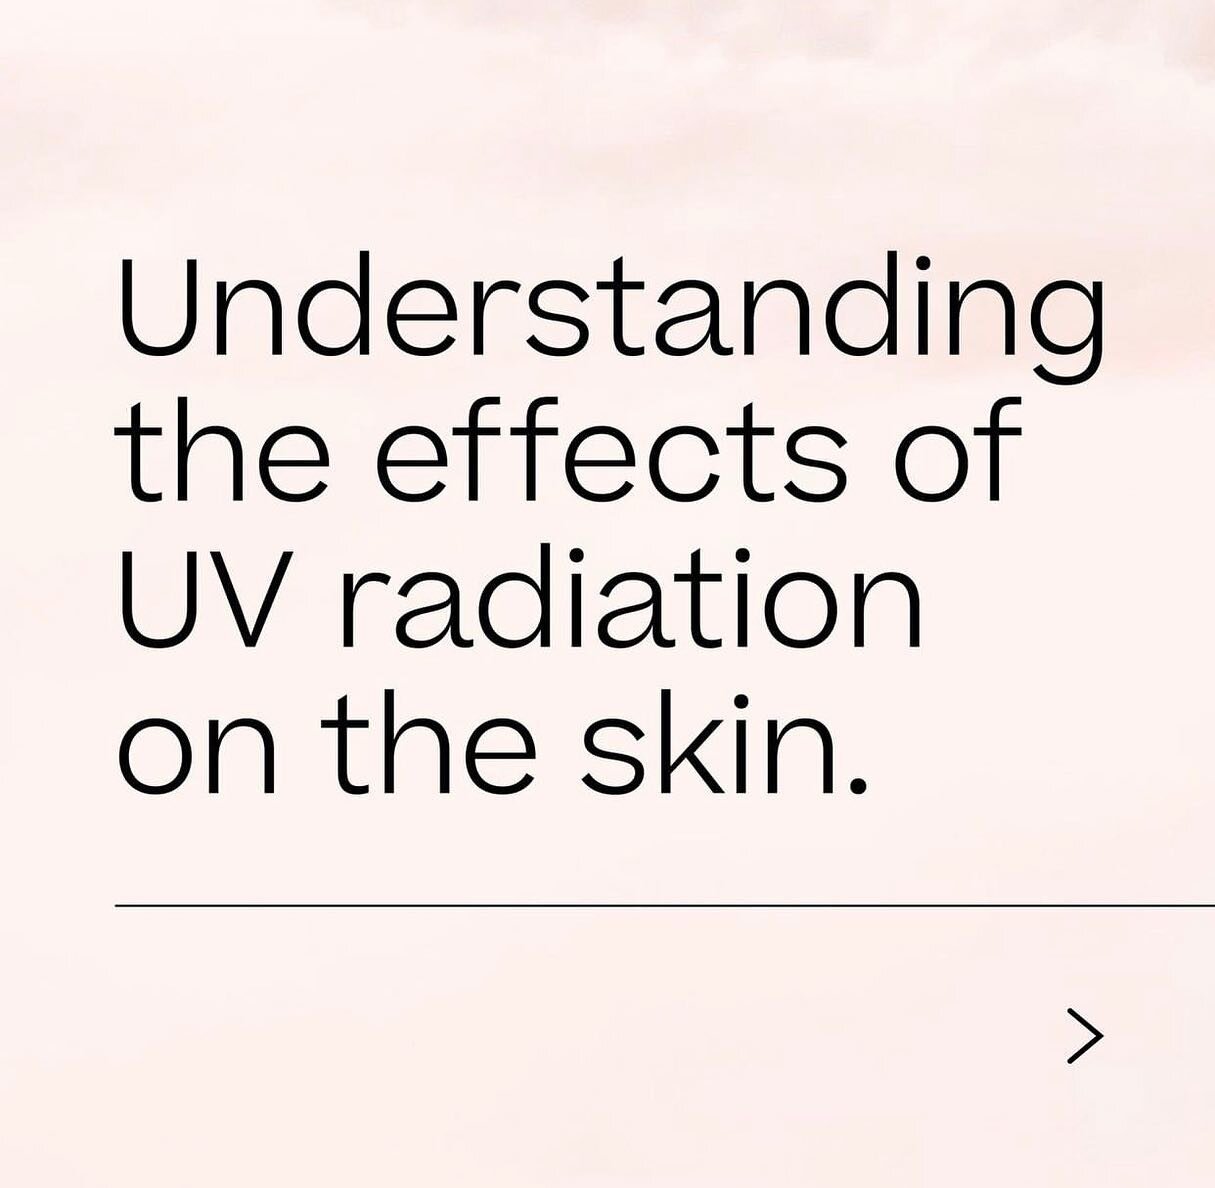 Understanding how UV radiation affects our skin is essential to taking the right protective measures! 

Learn about skin cancer prevention at www.urbanalluresf.com/skin-cancer-prevention

#linkinbio #sunprotection #spf #sunscreeneveryday #skintreatme